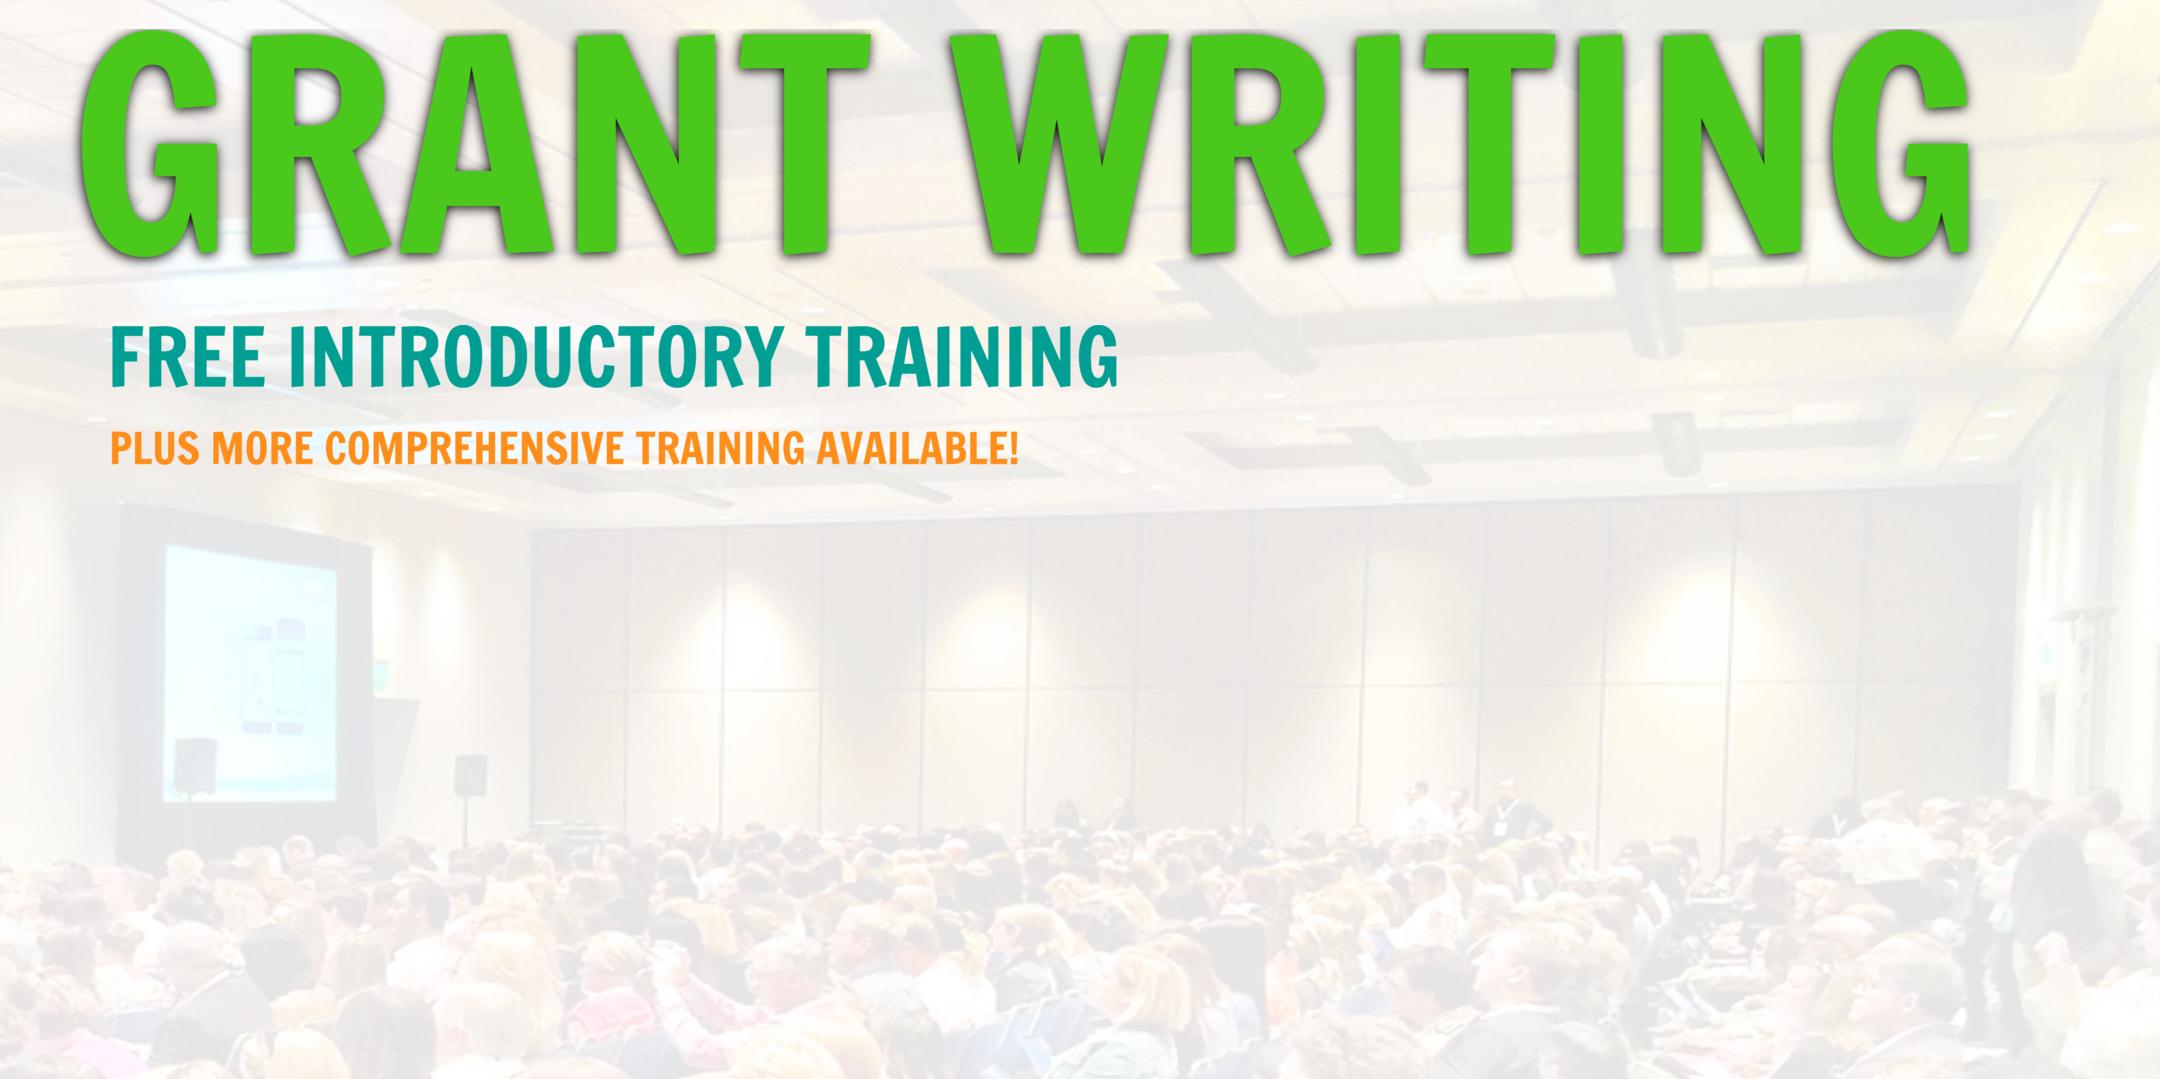 Grant Writing Introductory Training... Newark, New Jersey 